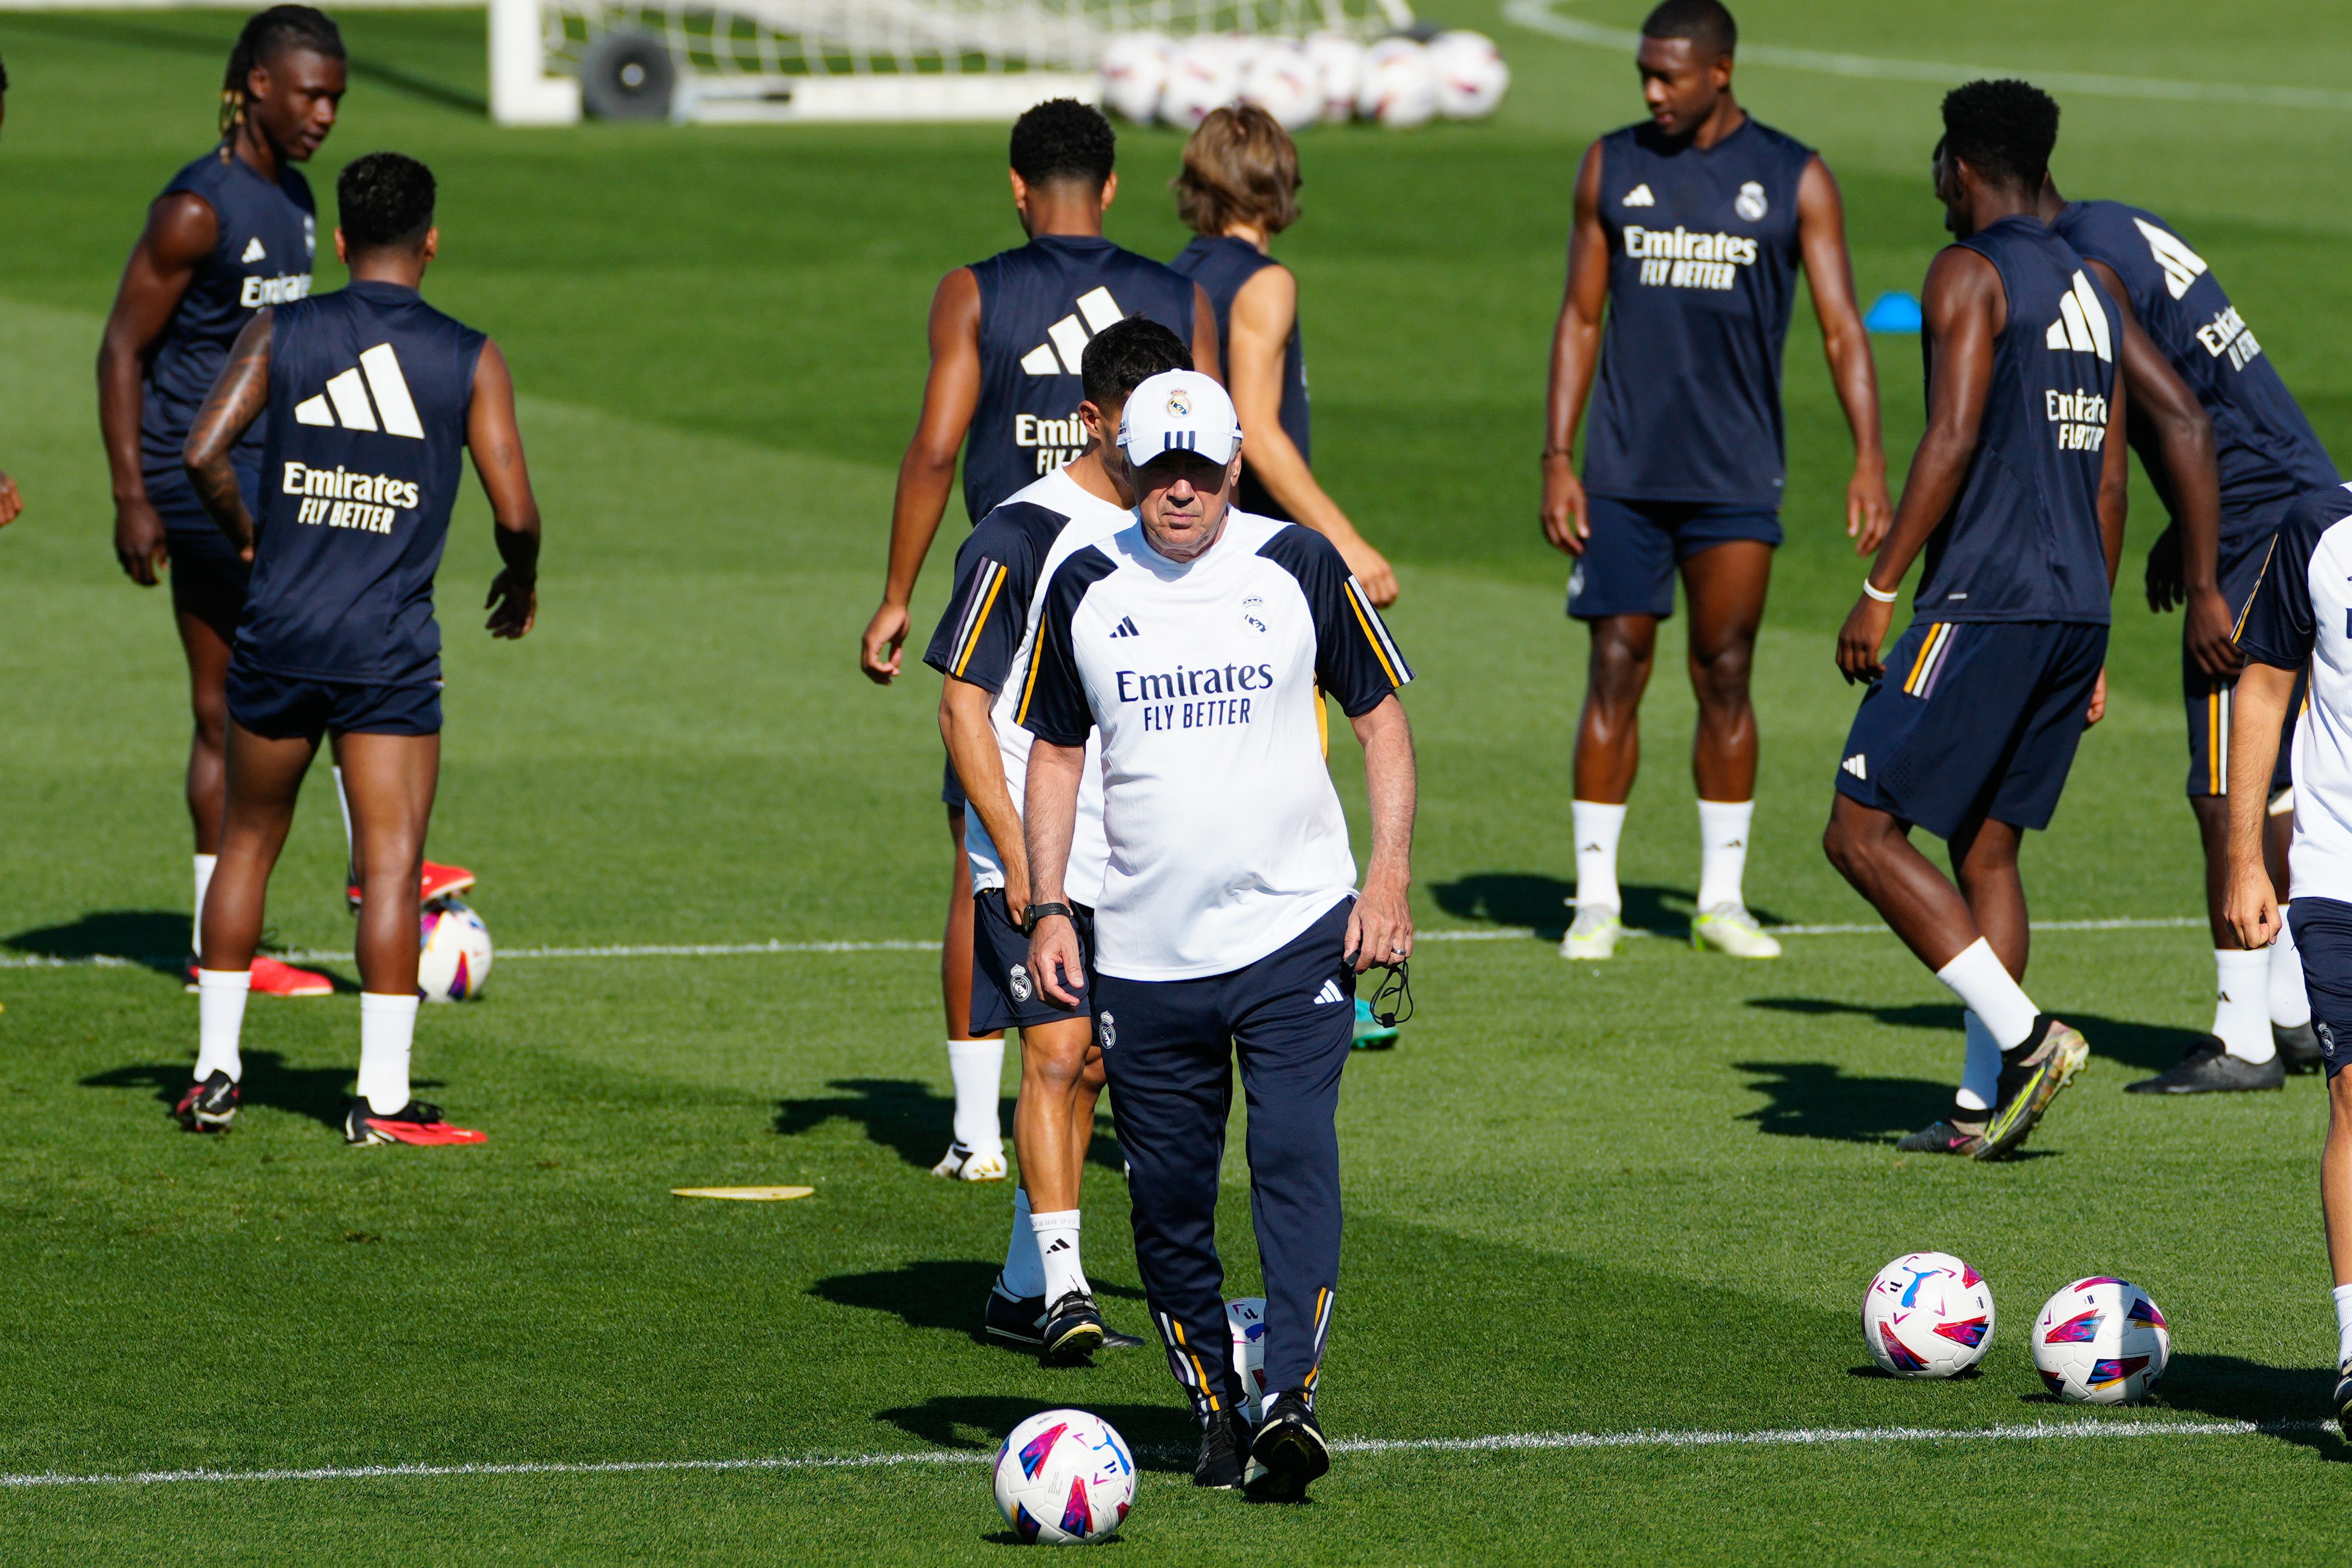 Carlo Ancelotti leads Real Madrid's training session this Friday.